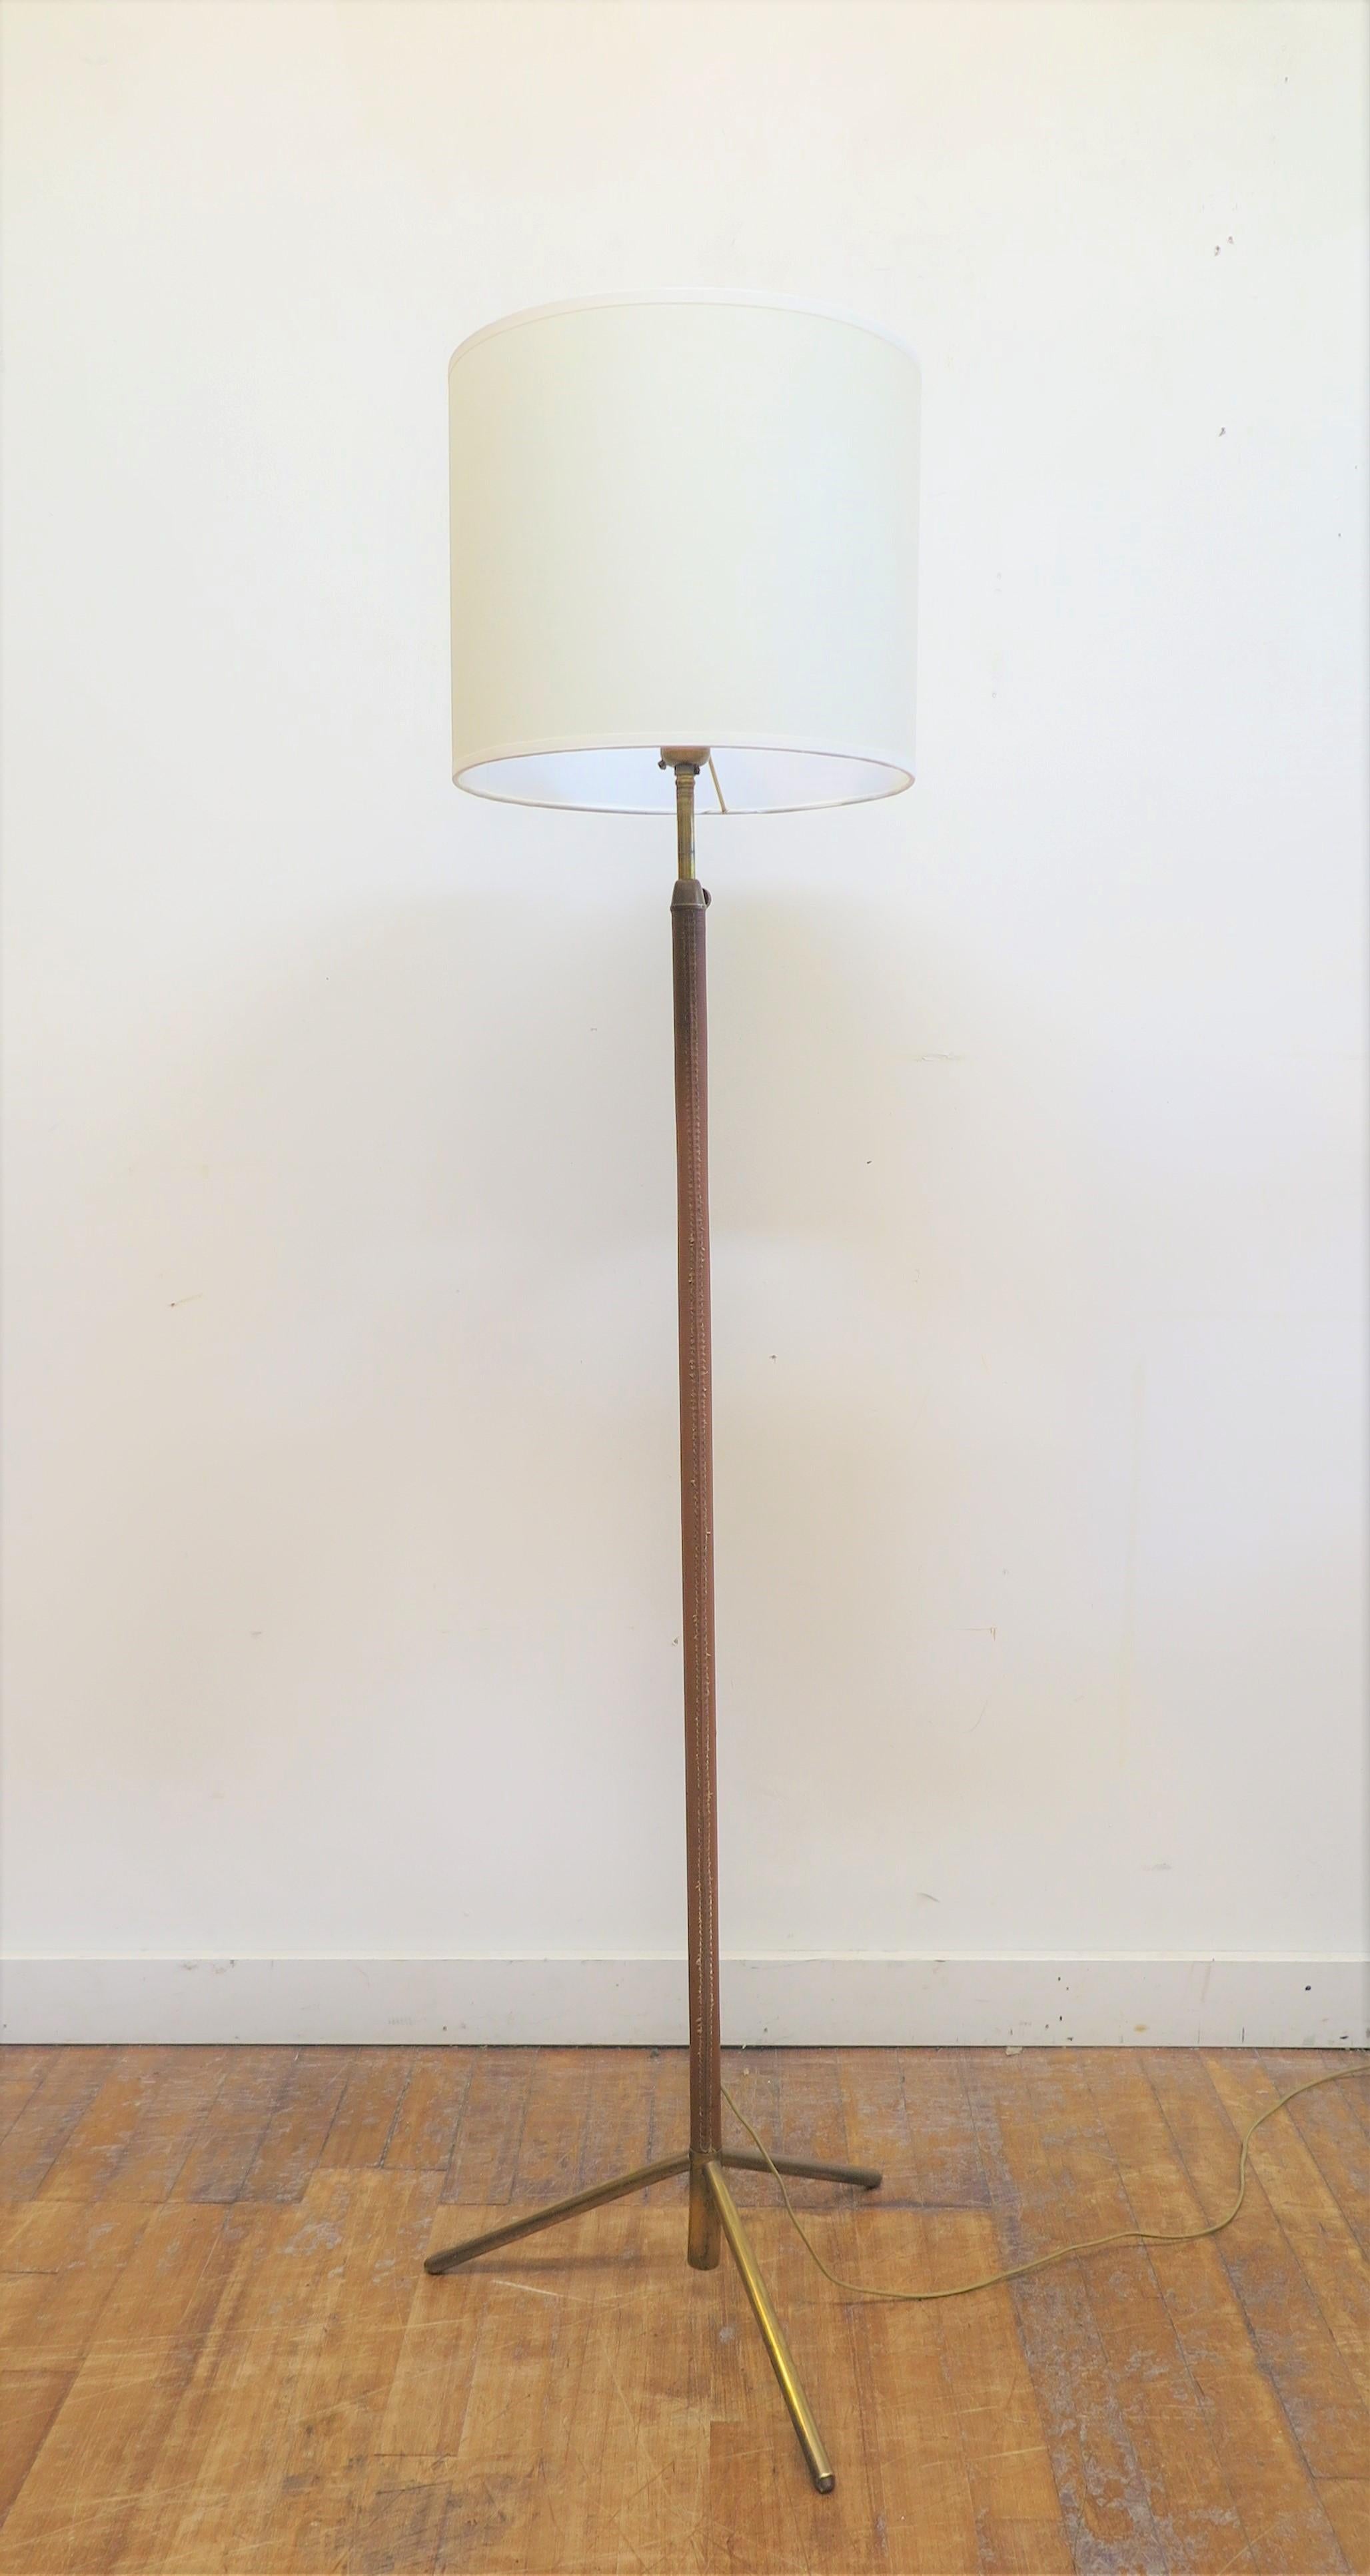 French Mid Century Leather wrapped extending floor lamp attributed Jacques Adnet. French Leather wrapped Floor Lamp box stitched light brown original leather and stich. Solid brass tripod base. Lamp extends to 74 inches from 56 inches, brass pole